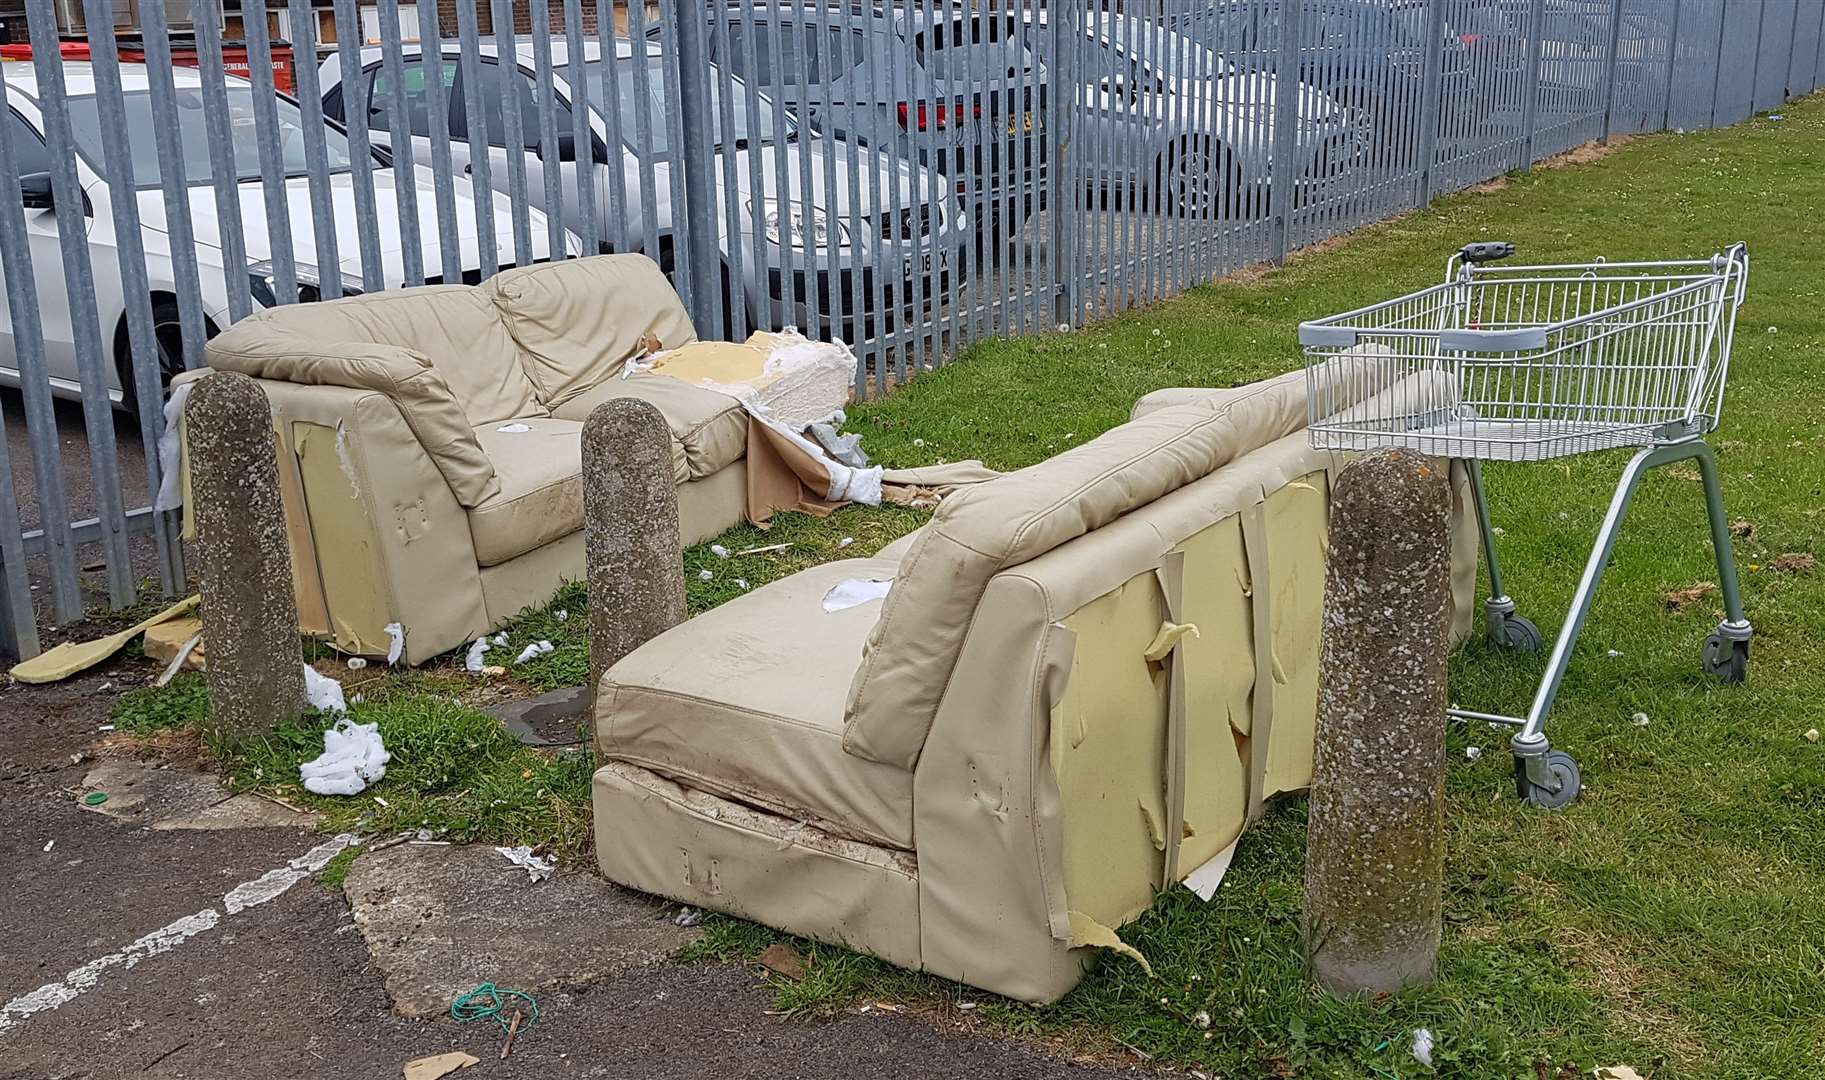 Abandoned sofas, rubbish and shopping trolleys were a common sight